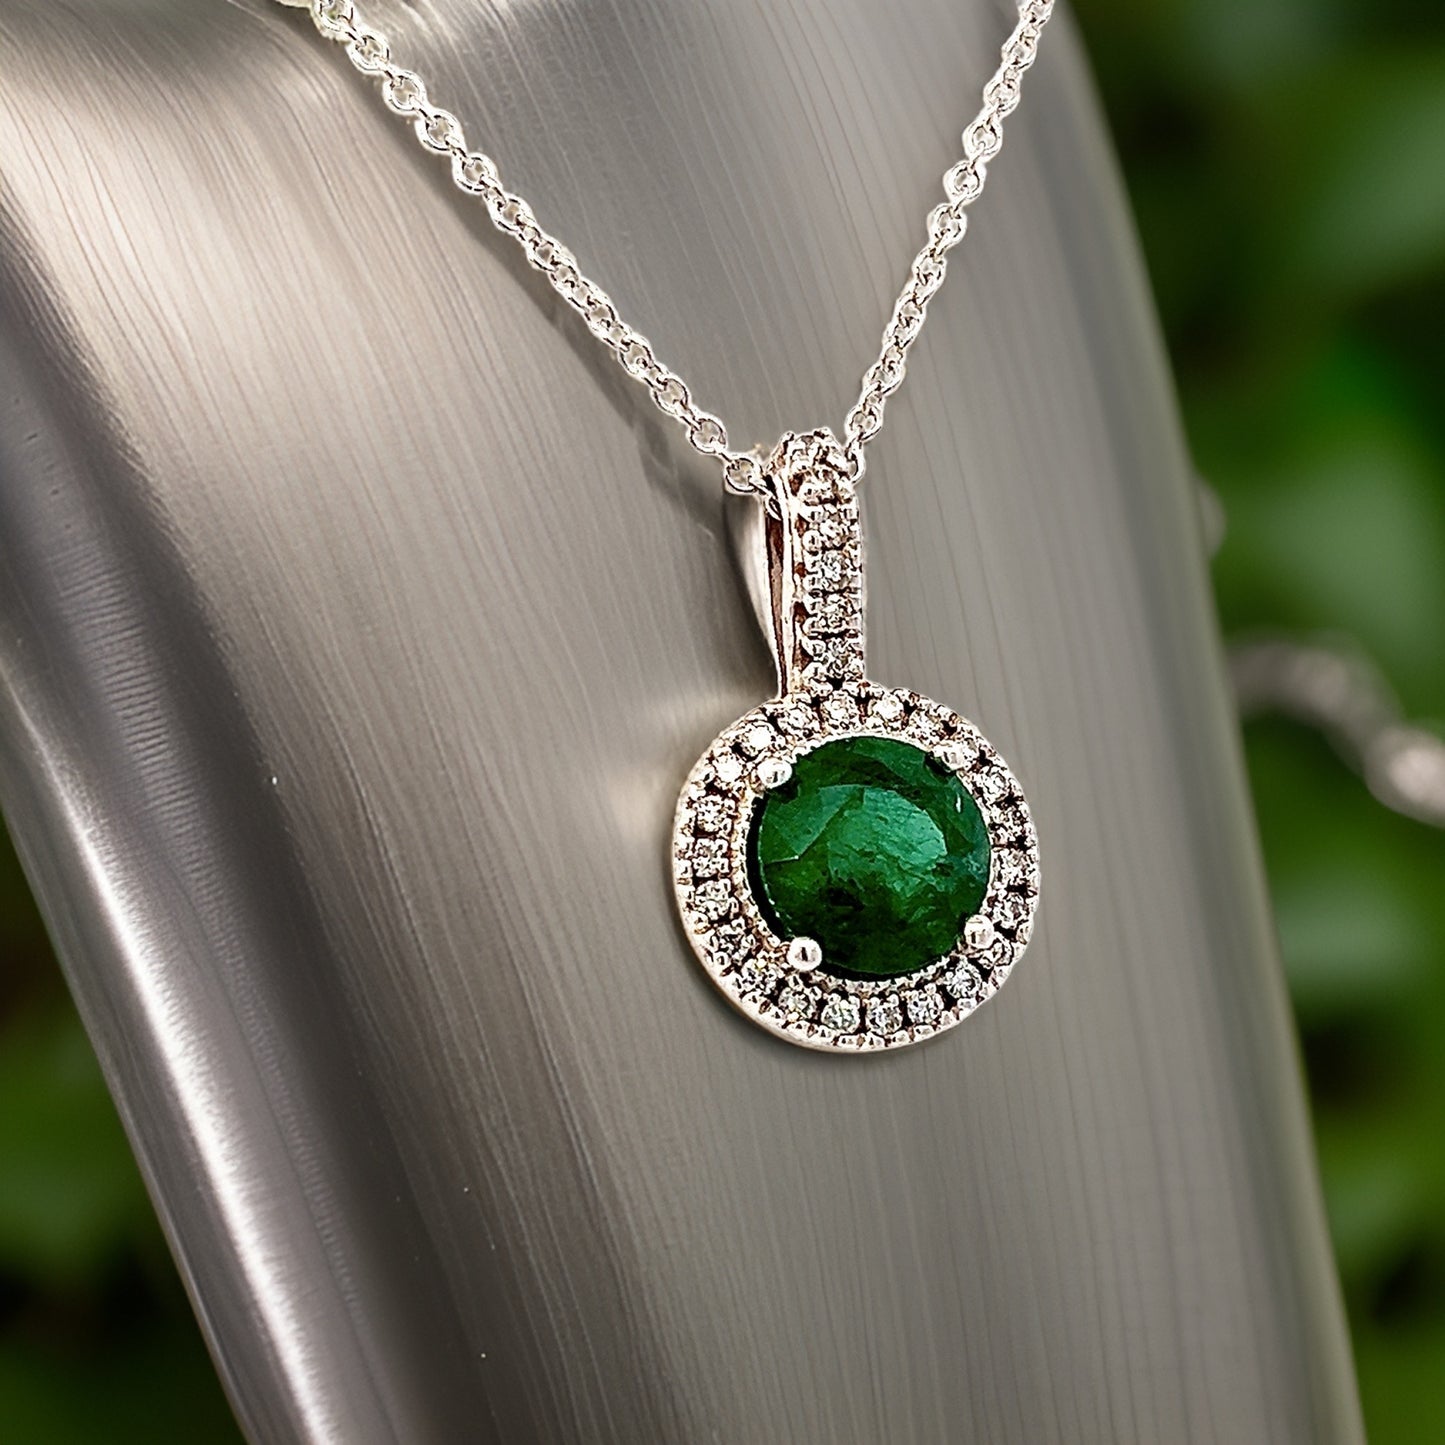 Natural Emerald Diamond Pendant Necklace 18" 14k W Gold 1.90 TCW Certified $4,950 301448